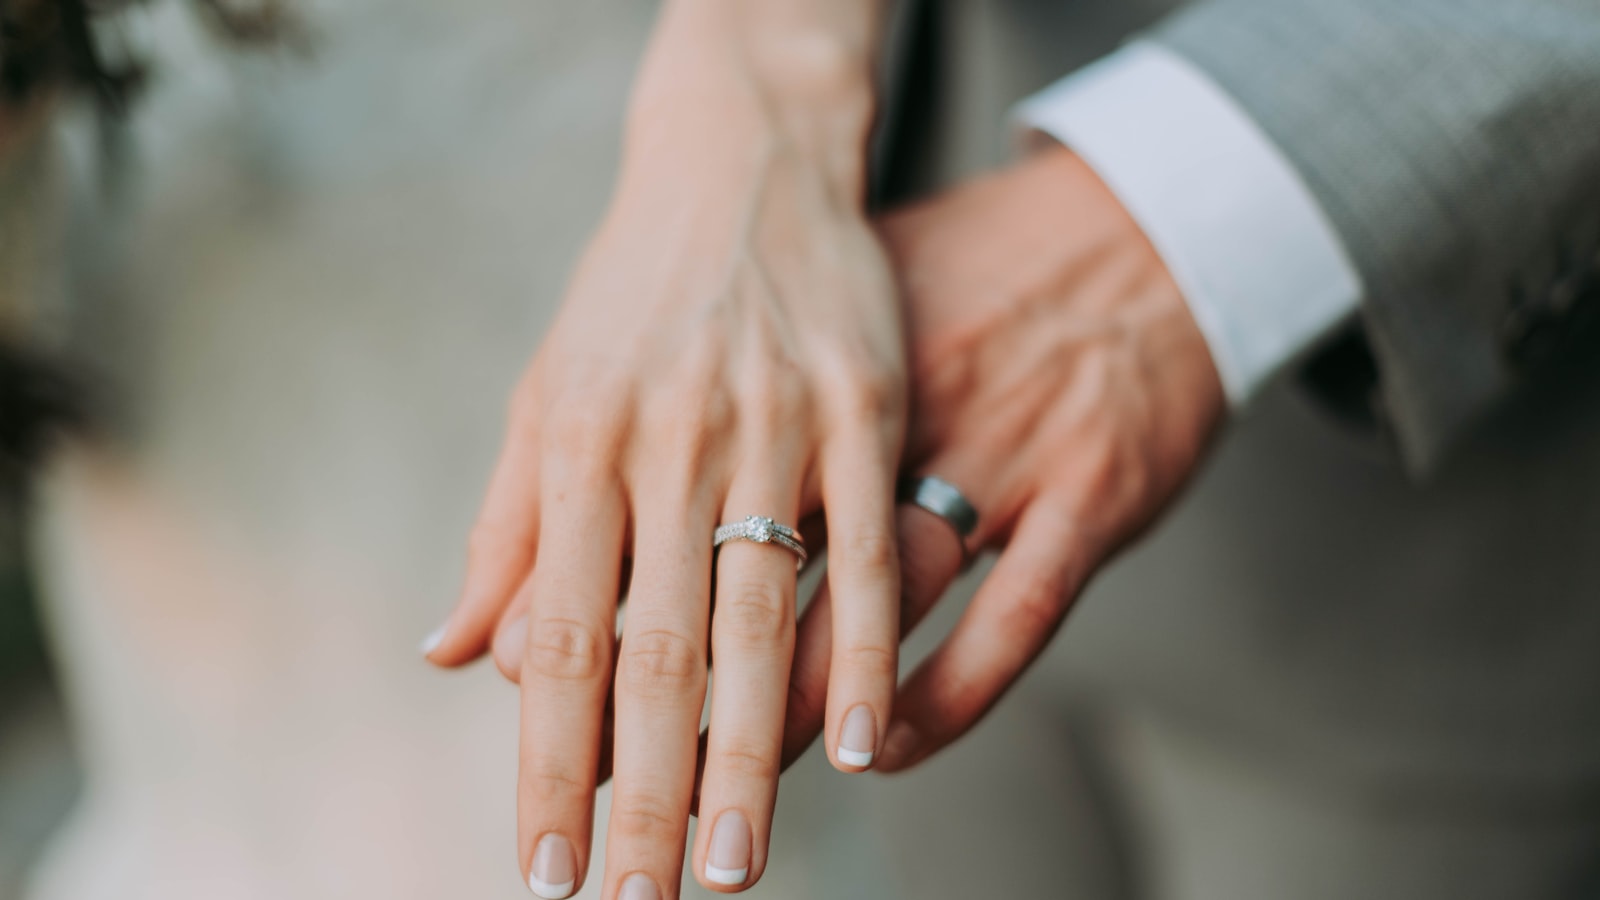 Are Engagement and Wedding Rings the Same?